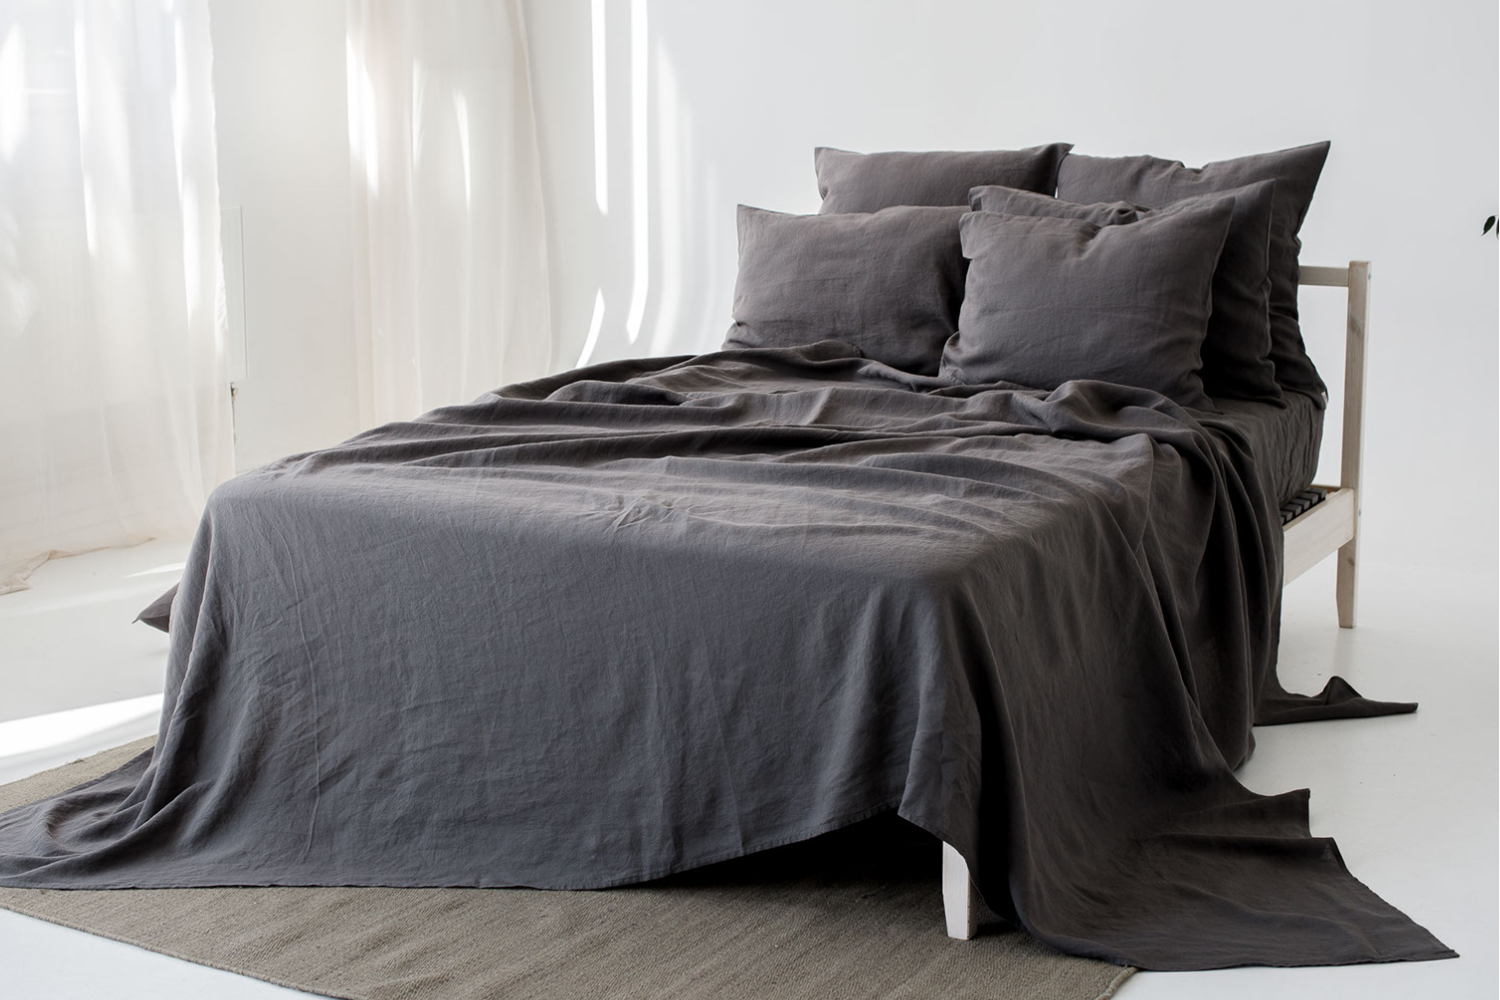 MLH SHOPPING GUIDE: CHOOSING FLAT AND FITTED LINEN SHEETS